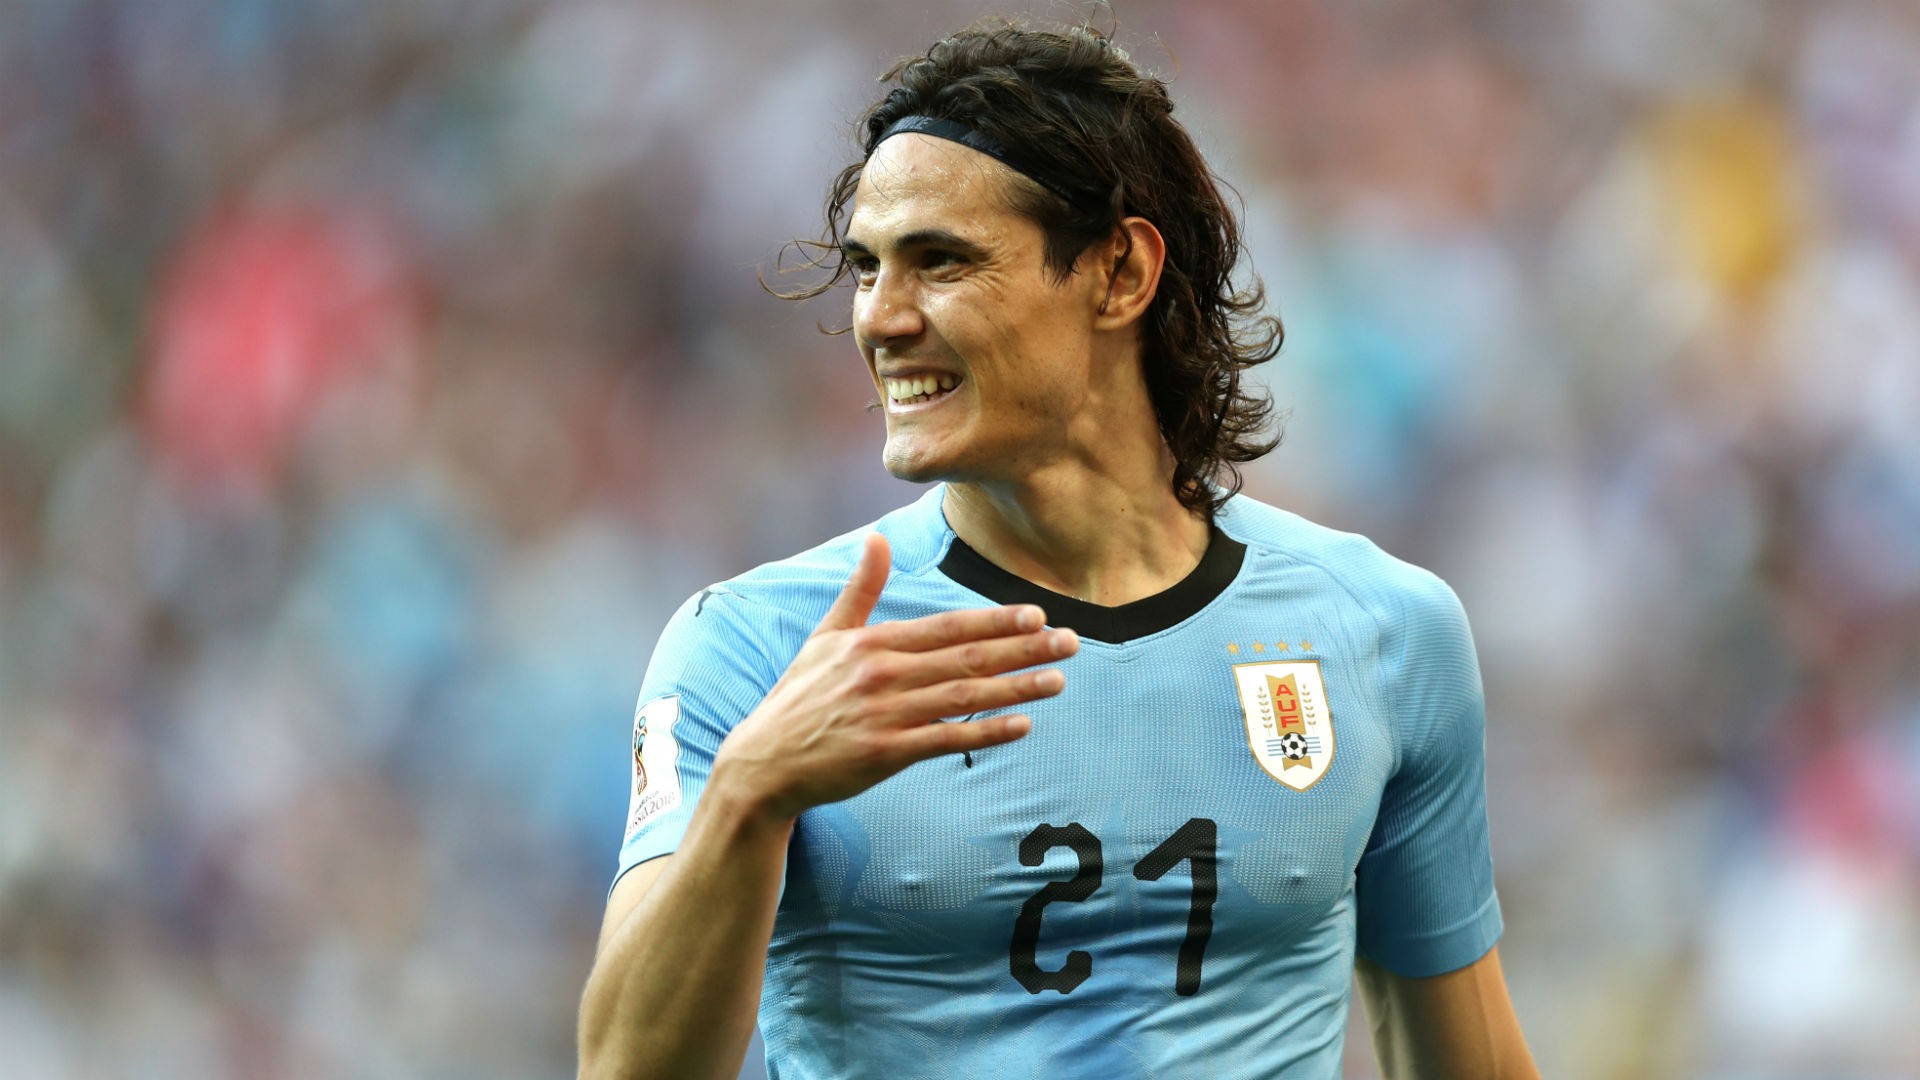 Edinson Cavani Uruguay Wallpaper HD with image resolution 1920x1080 pixel. You can make this wallpaper for your Desktop Computer Backgrounds, Mac Wallpapers, Android Lock screen or iPhone Screensavers